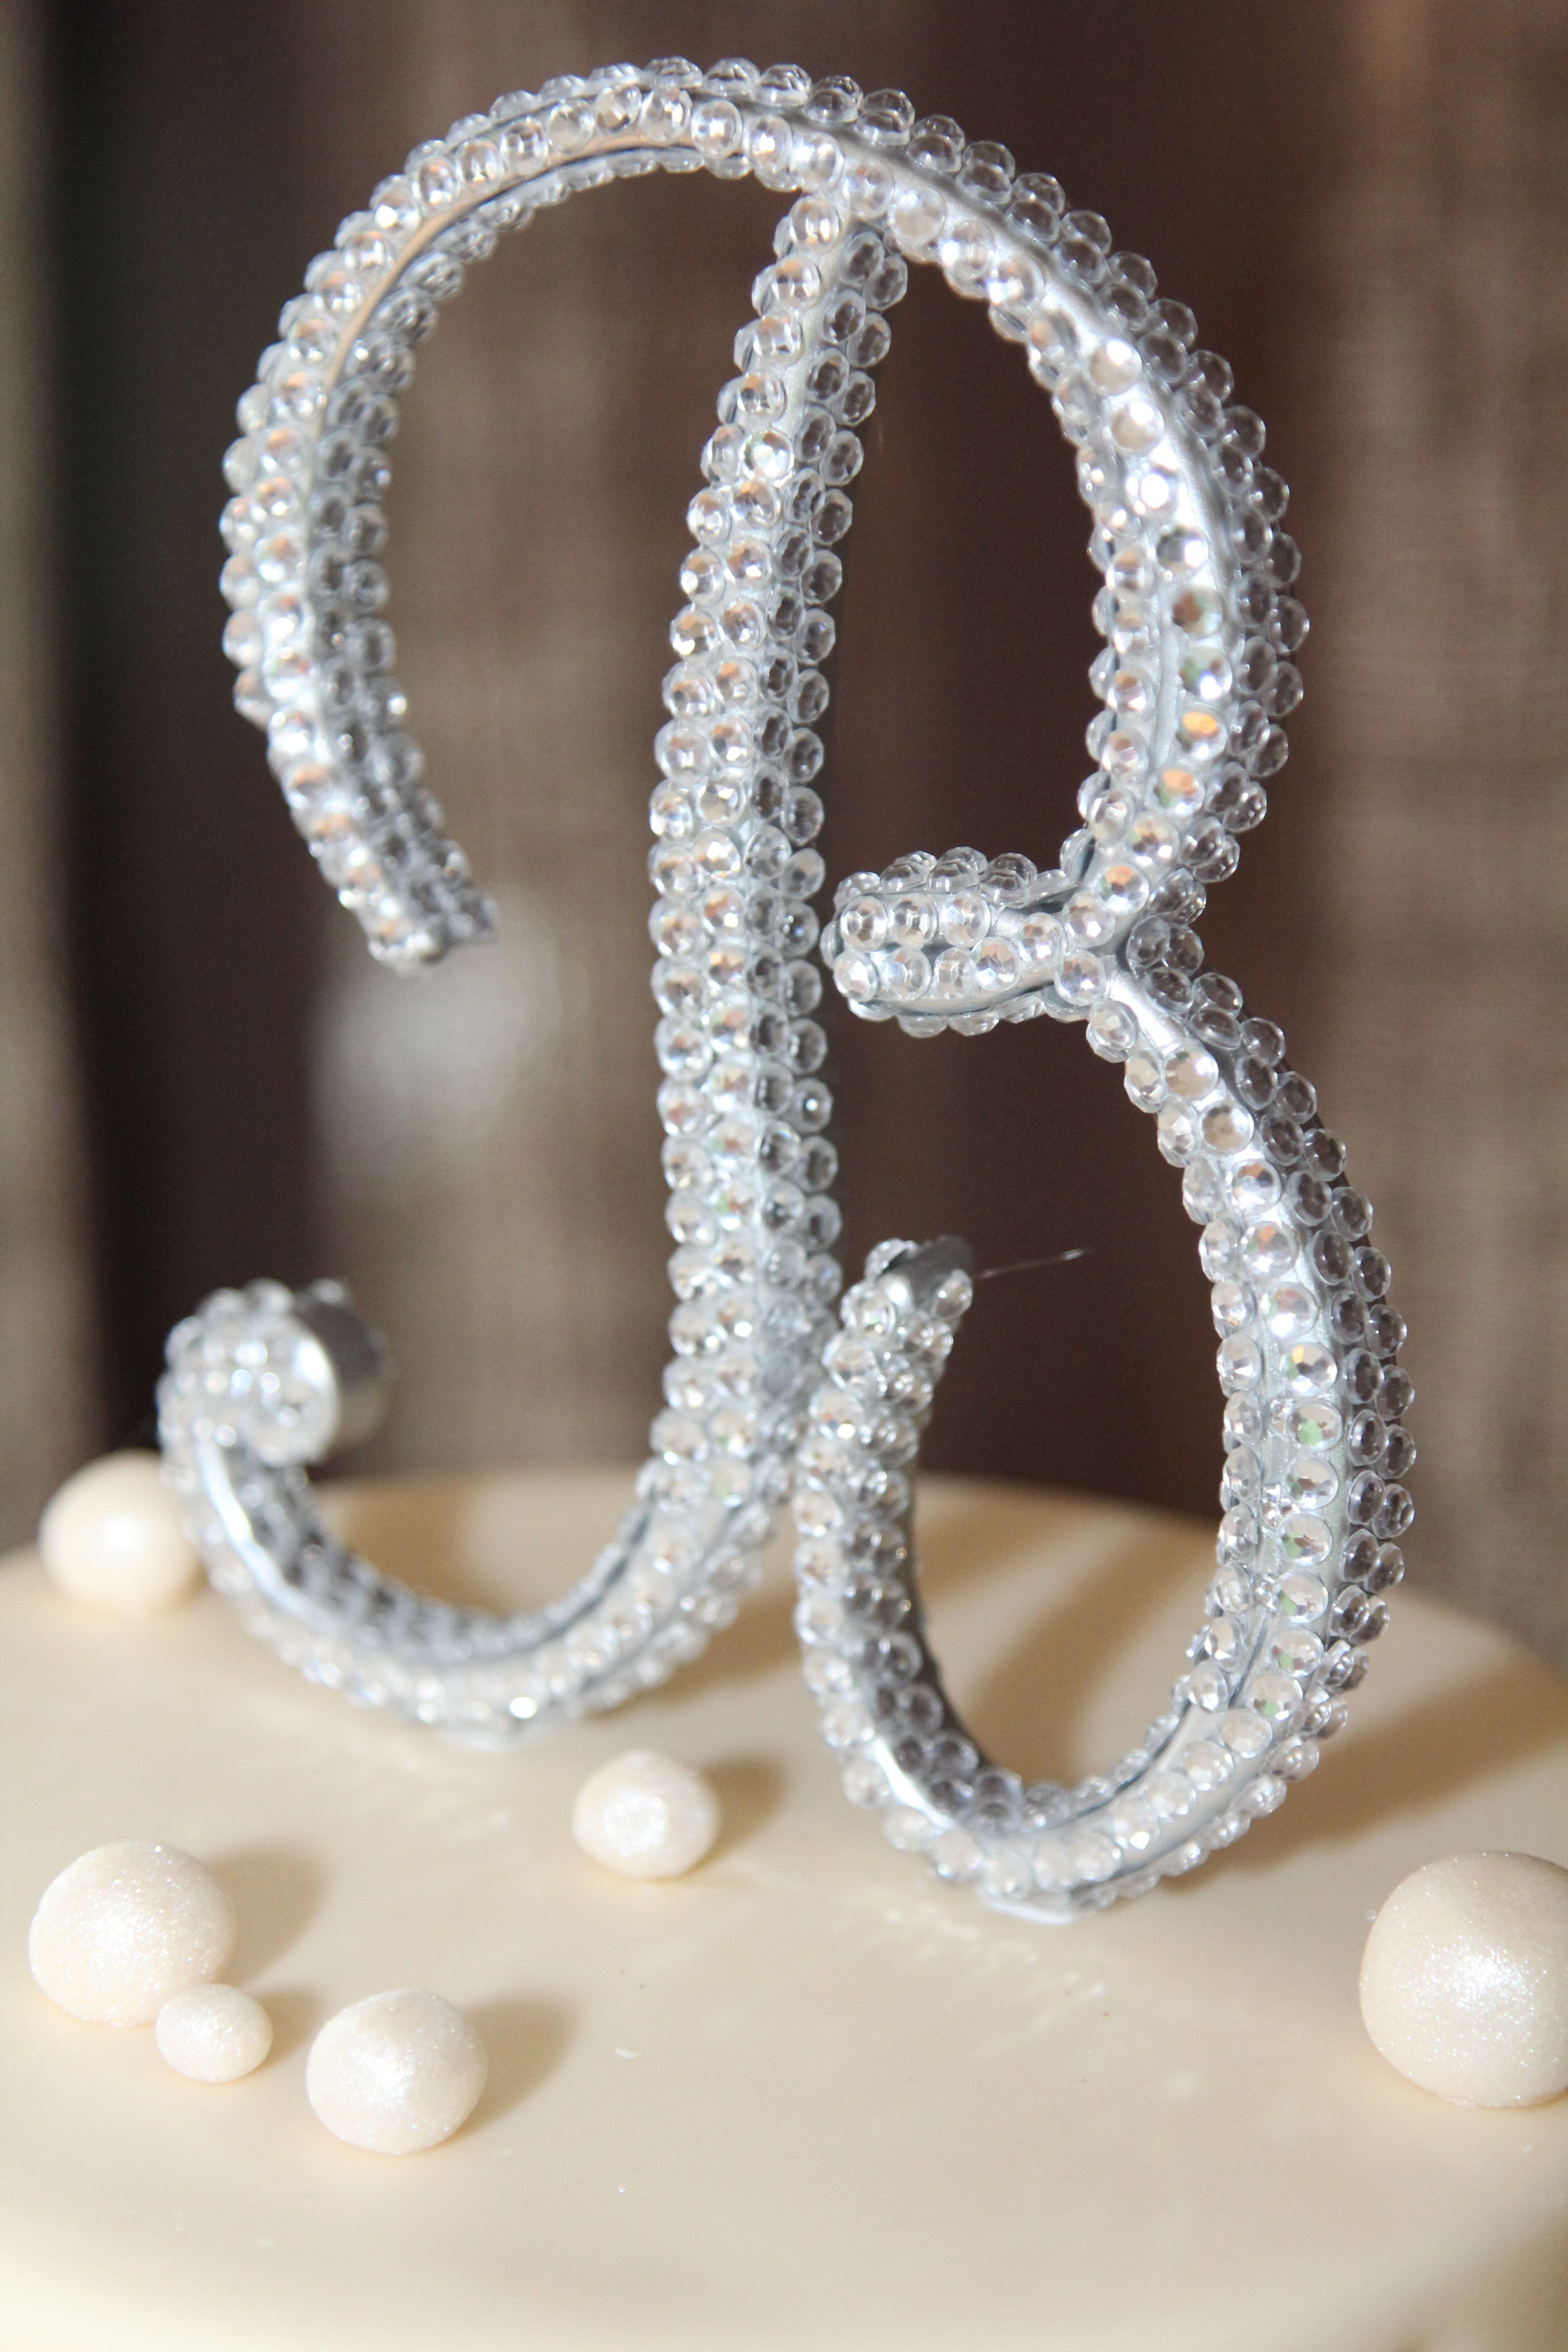 silver and diamond inverted letter b cake top decor free image